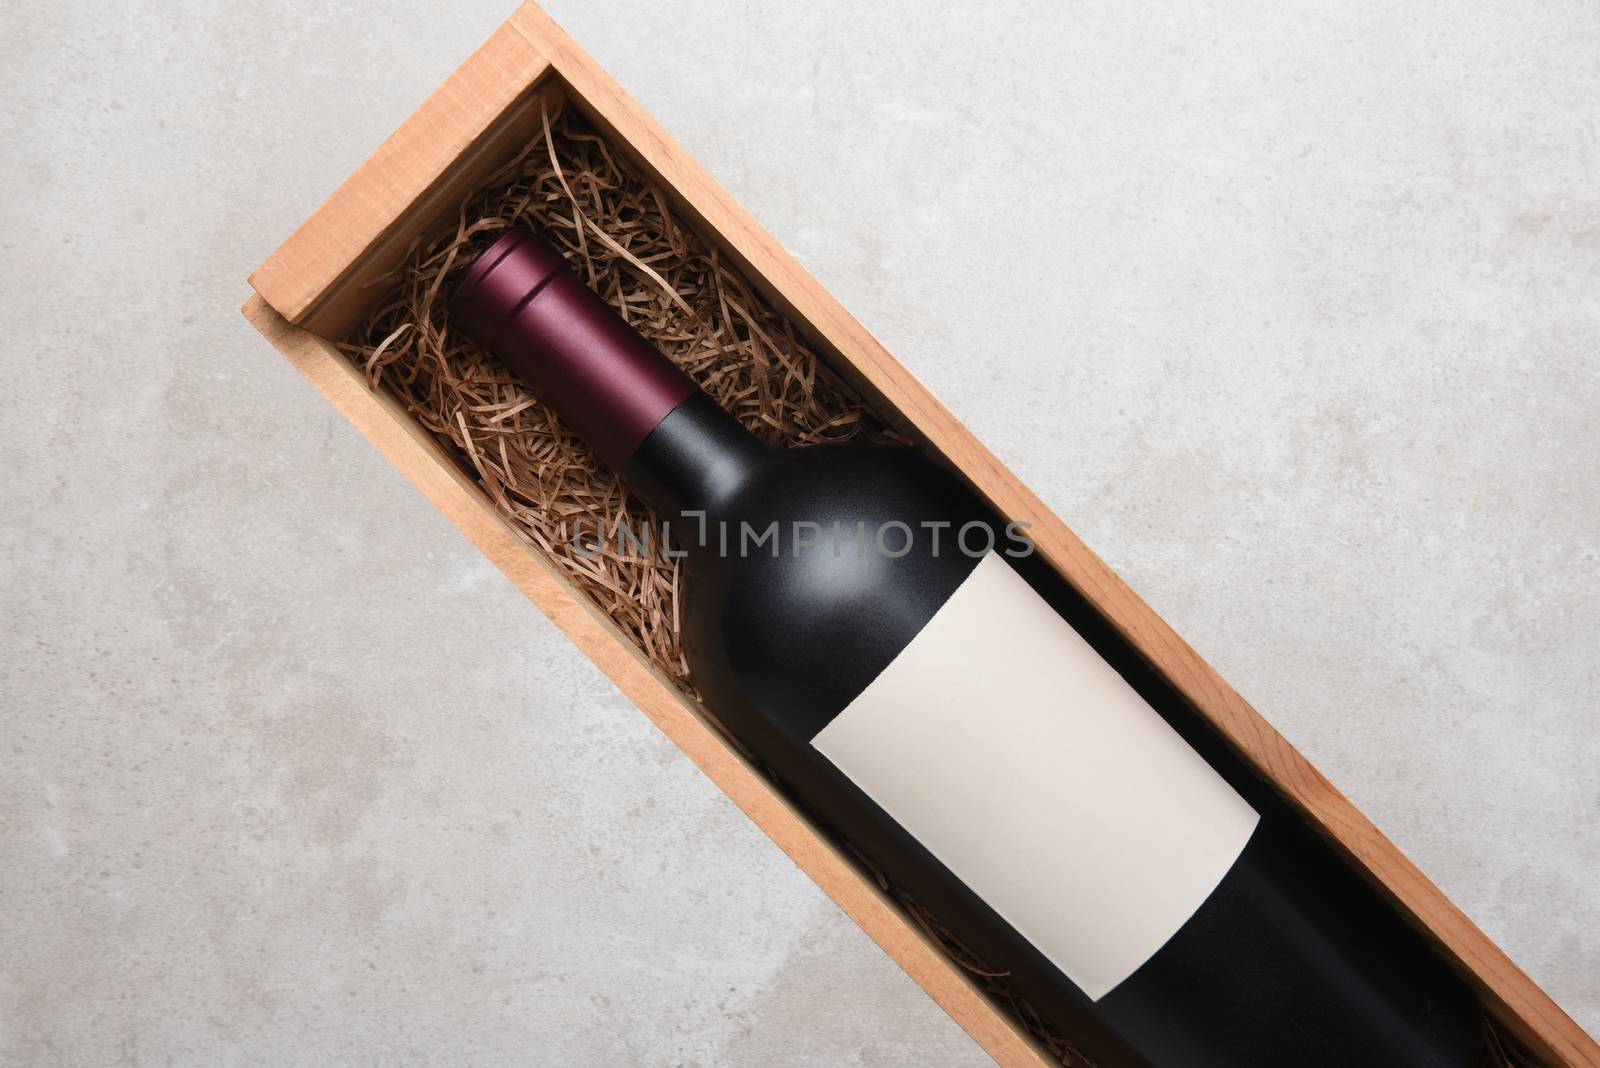 Red Wine Bottle: A single bottle of Cabernet wine in a wood case with packing straw. Bottle is at an angle with copy space on both sides.